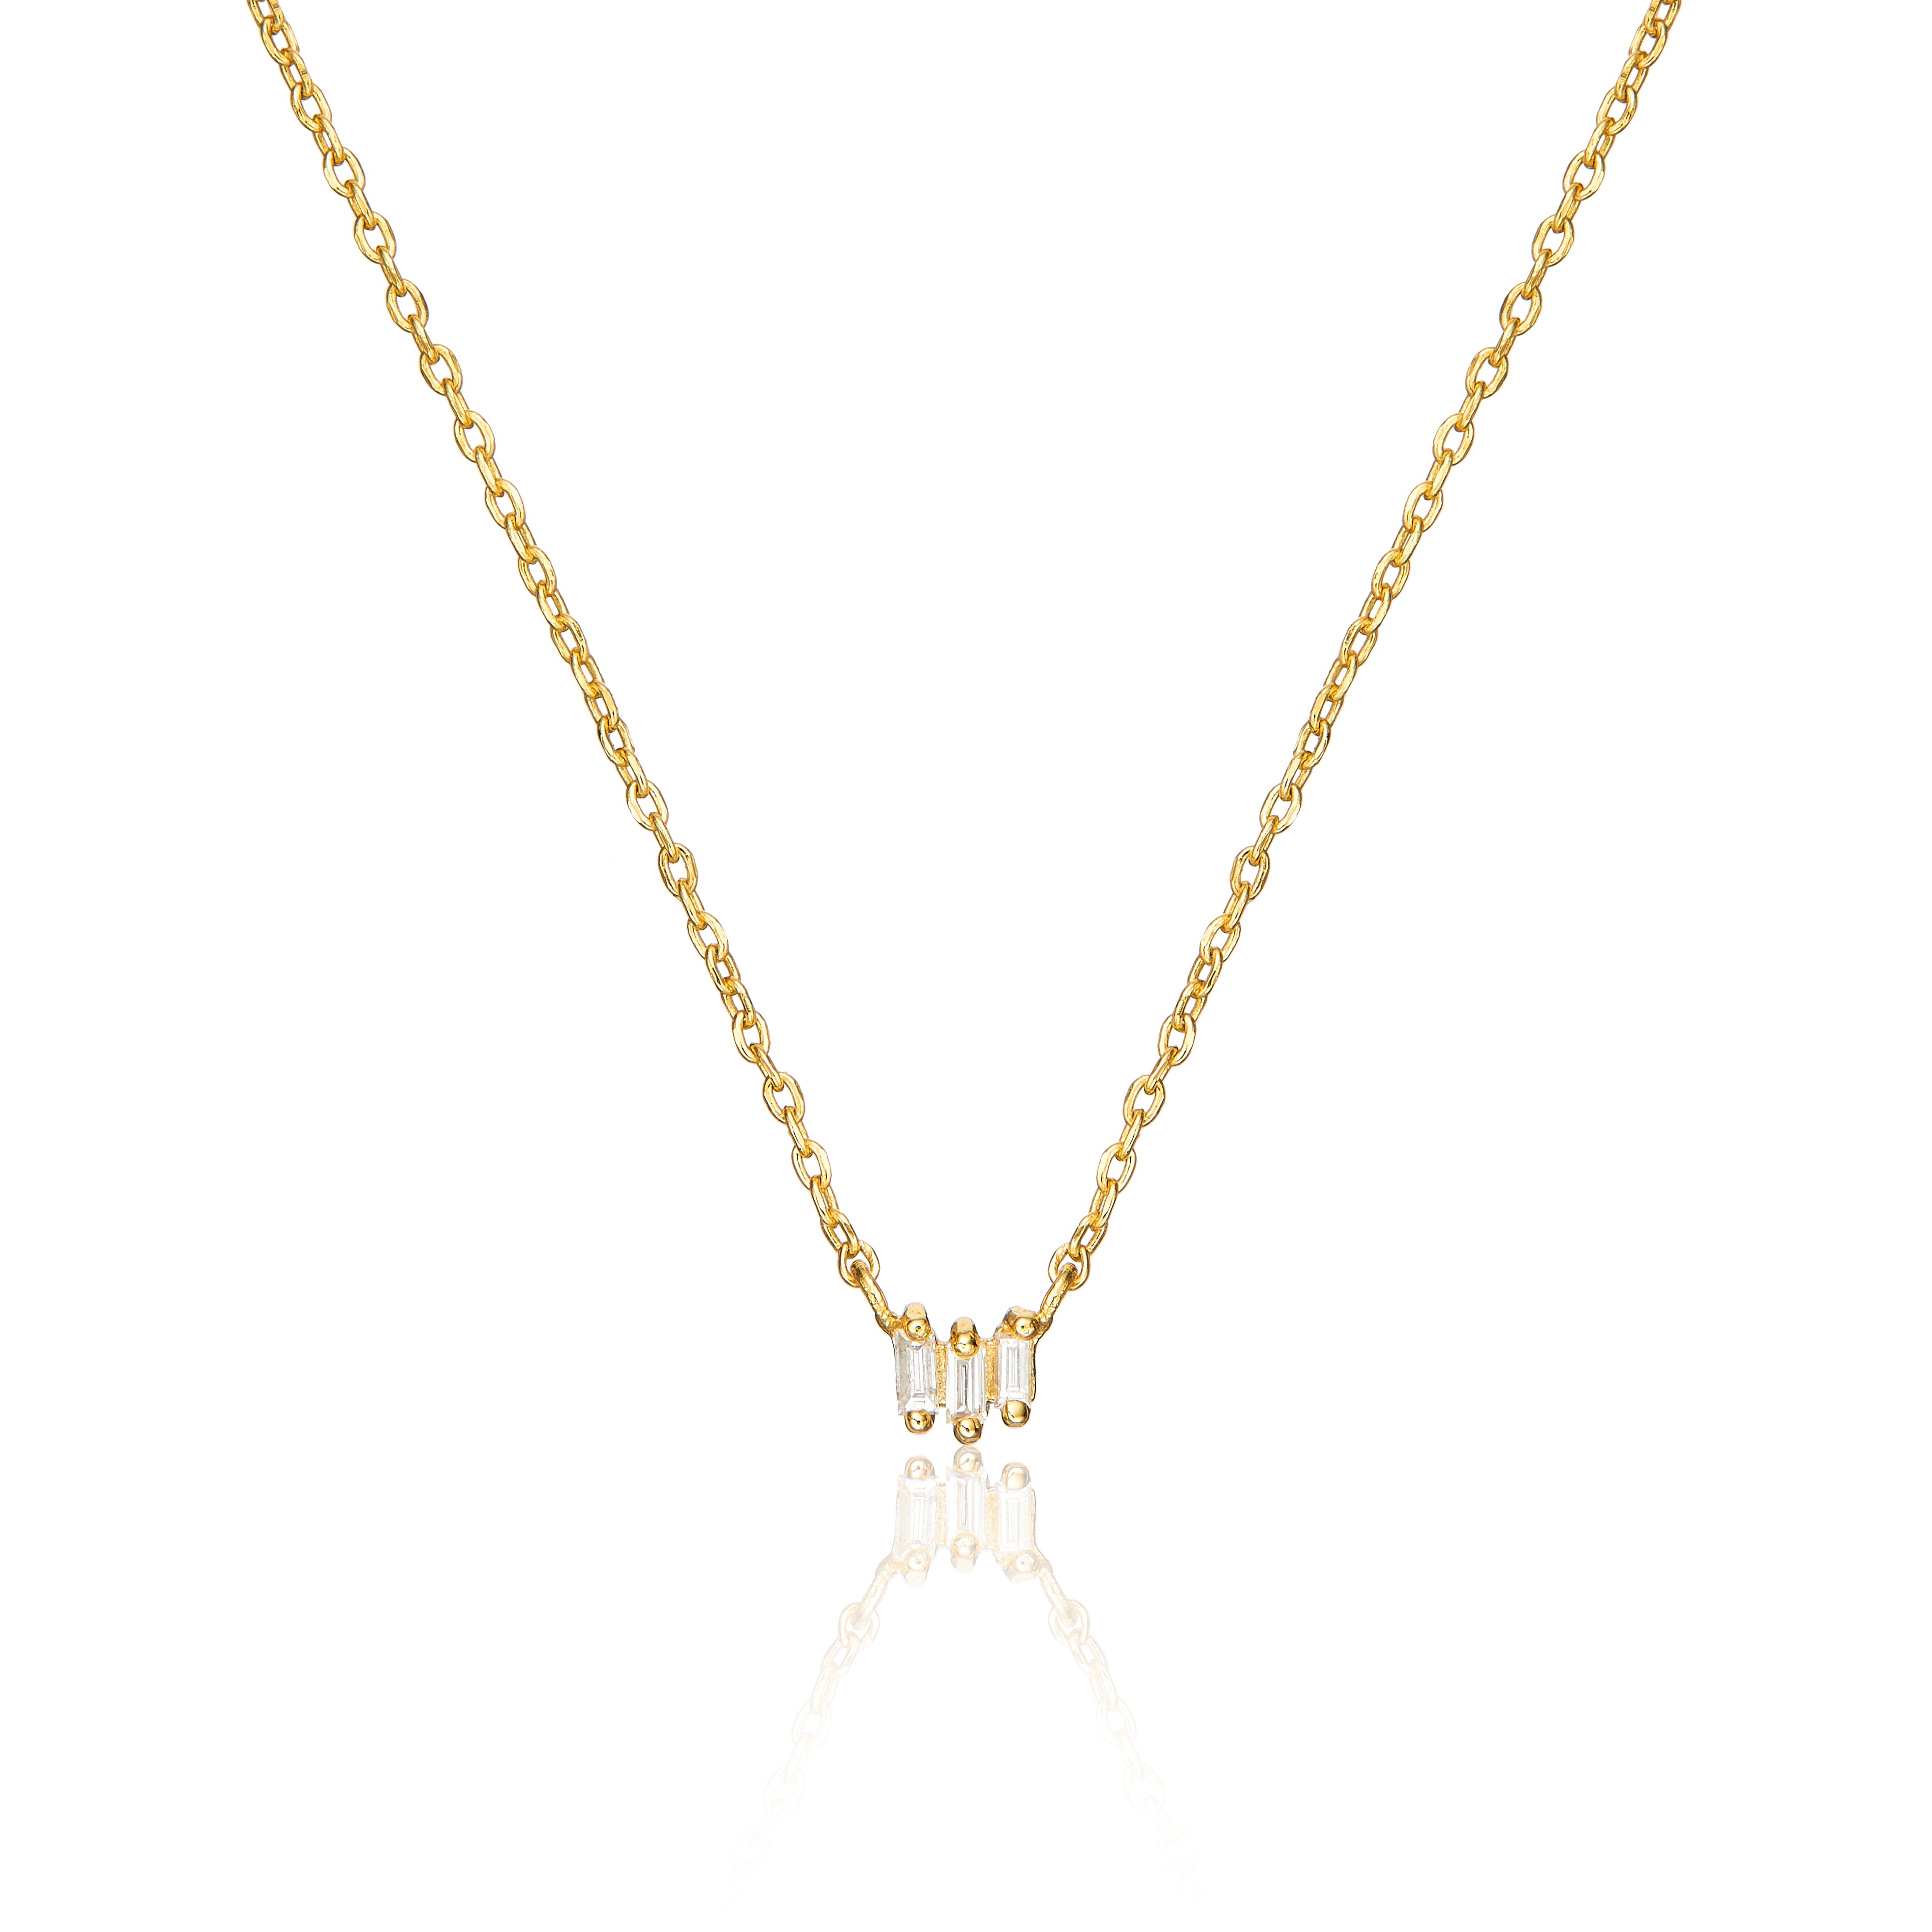 Gold triple baguette diamond necklace on a white background